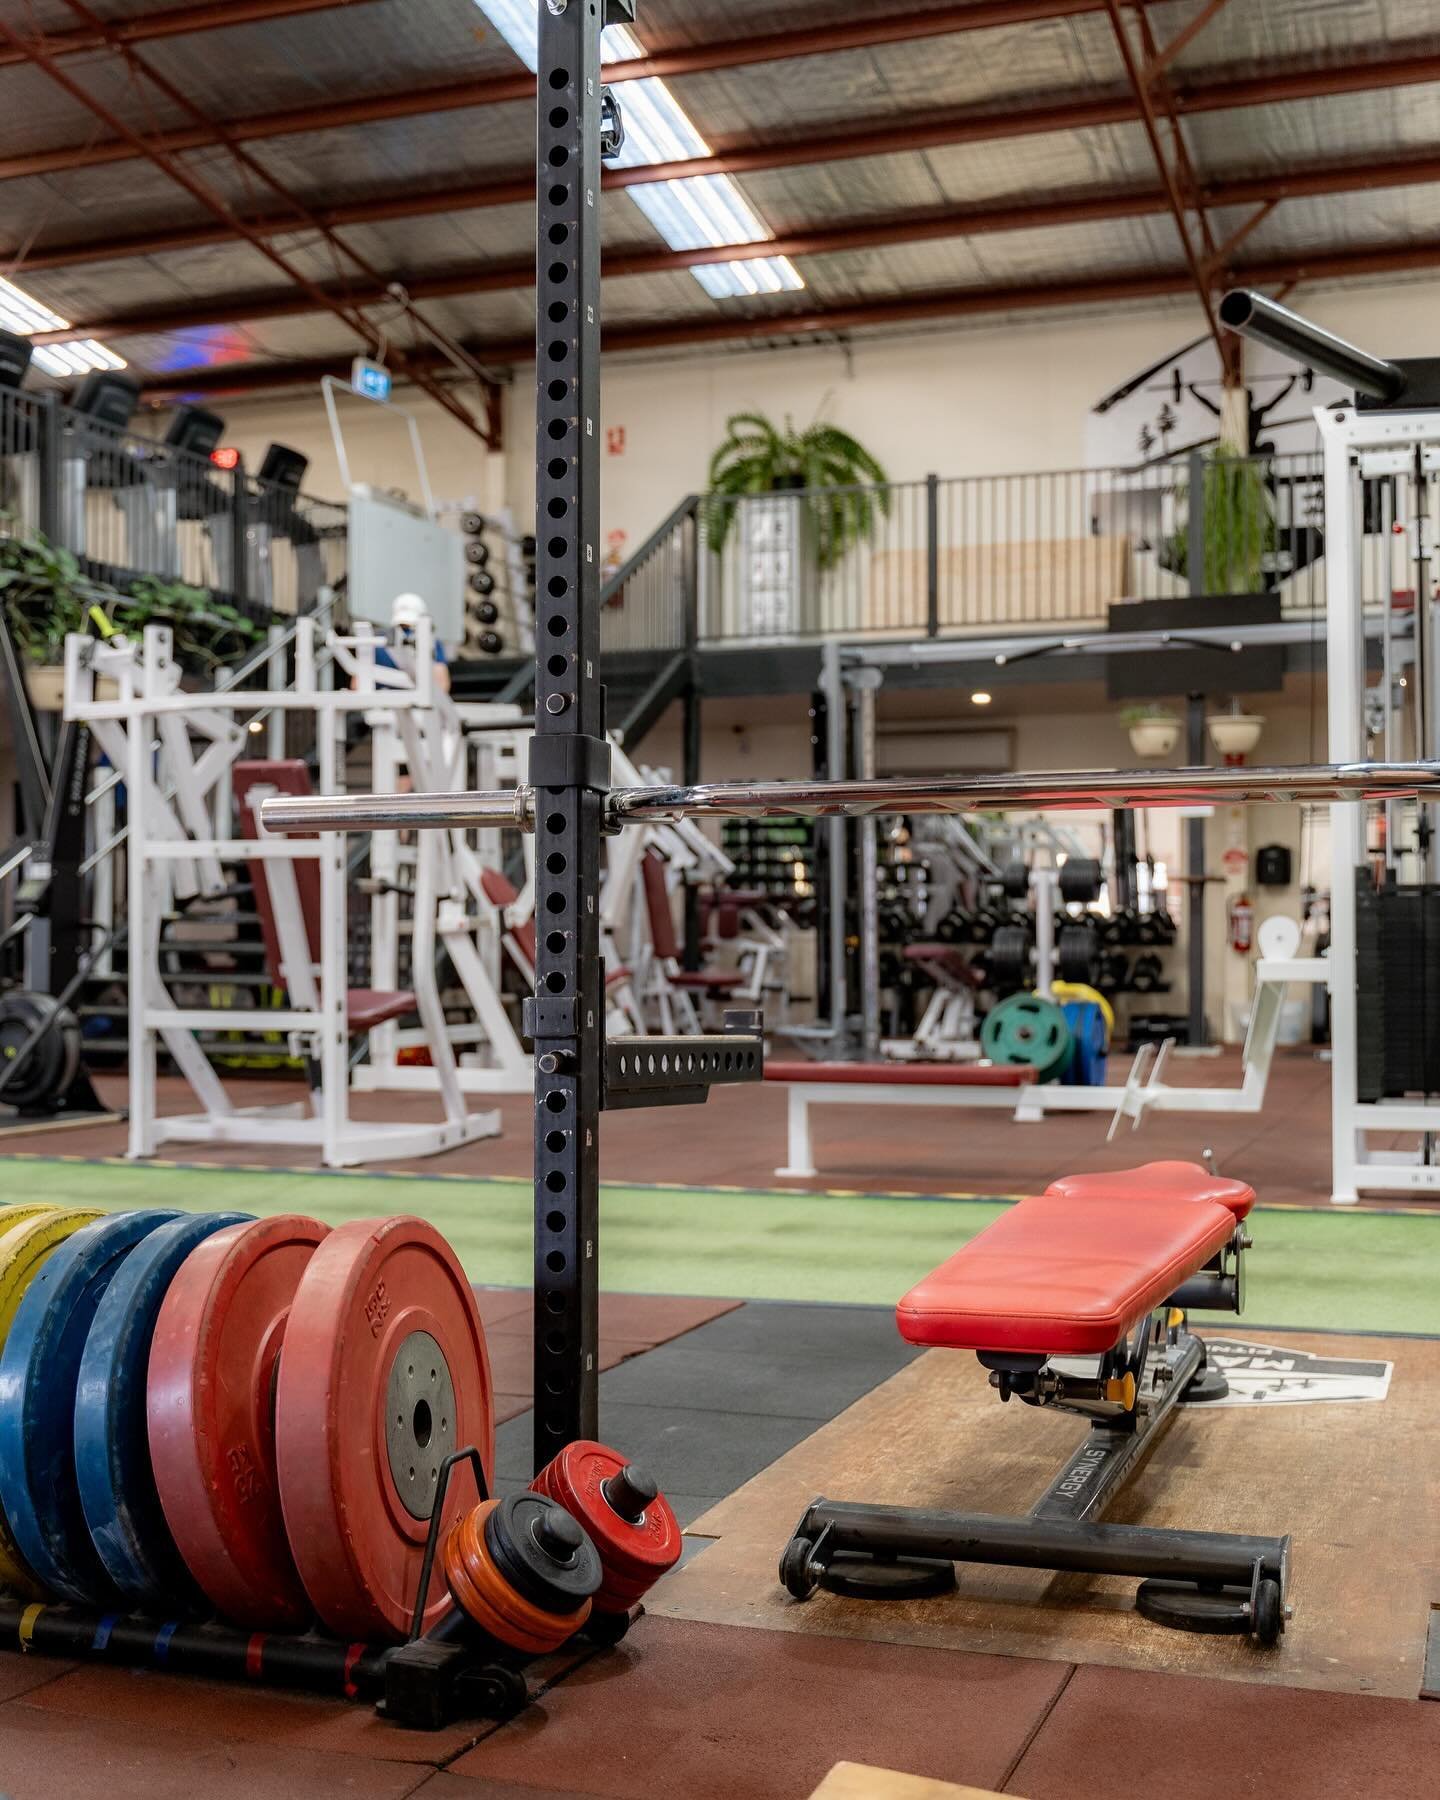 After a week of pushing hard, it&rsquo;s time to take a break and recharge for another week of achieving goals 💪

#castlemainemaldonsurrounds #castlemainegym #gym #fitness #fitnessaustralia #castlemania #mainefitness